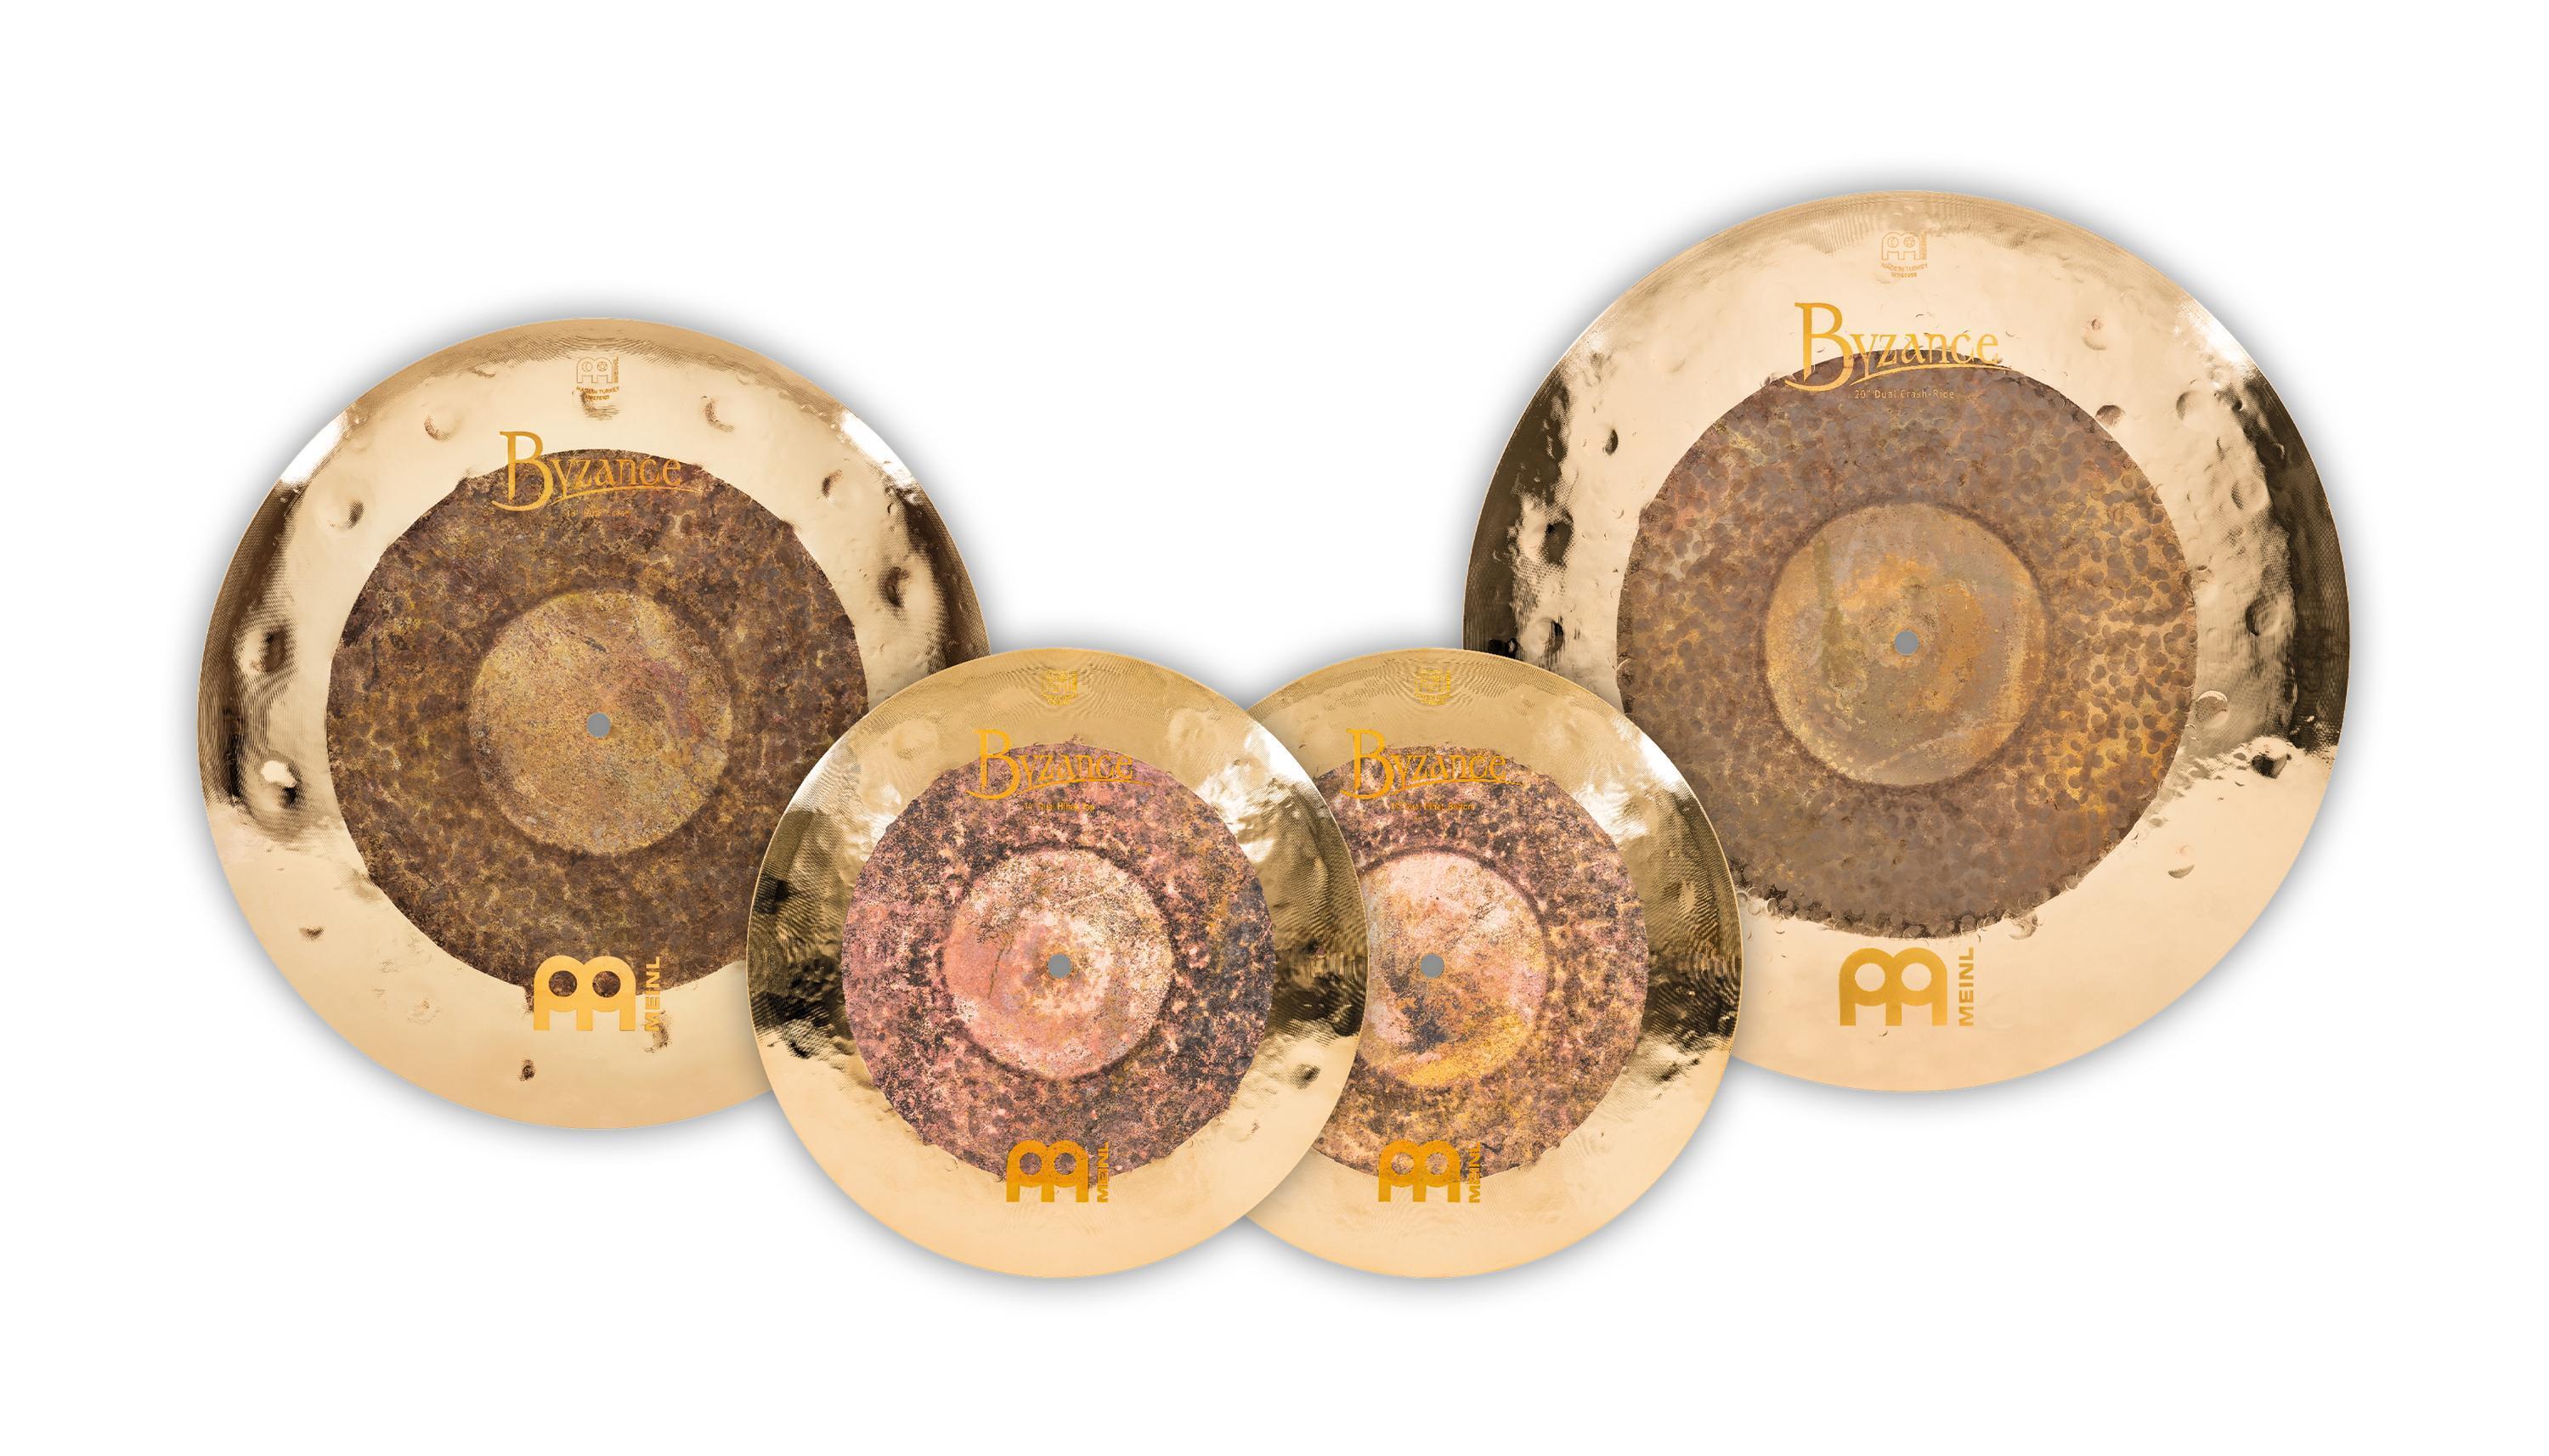 Meinl Cymbals Byzance Complete Cymbal Set #1 | Sweetwater